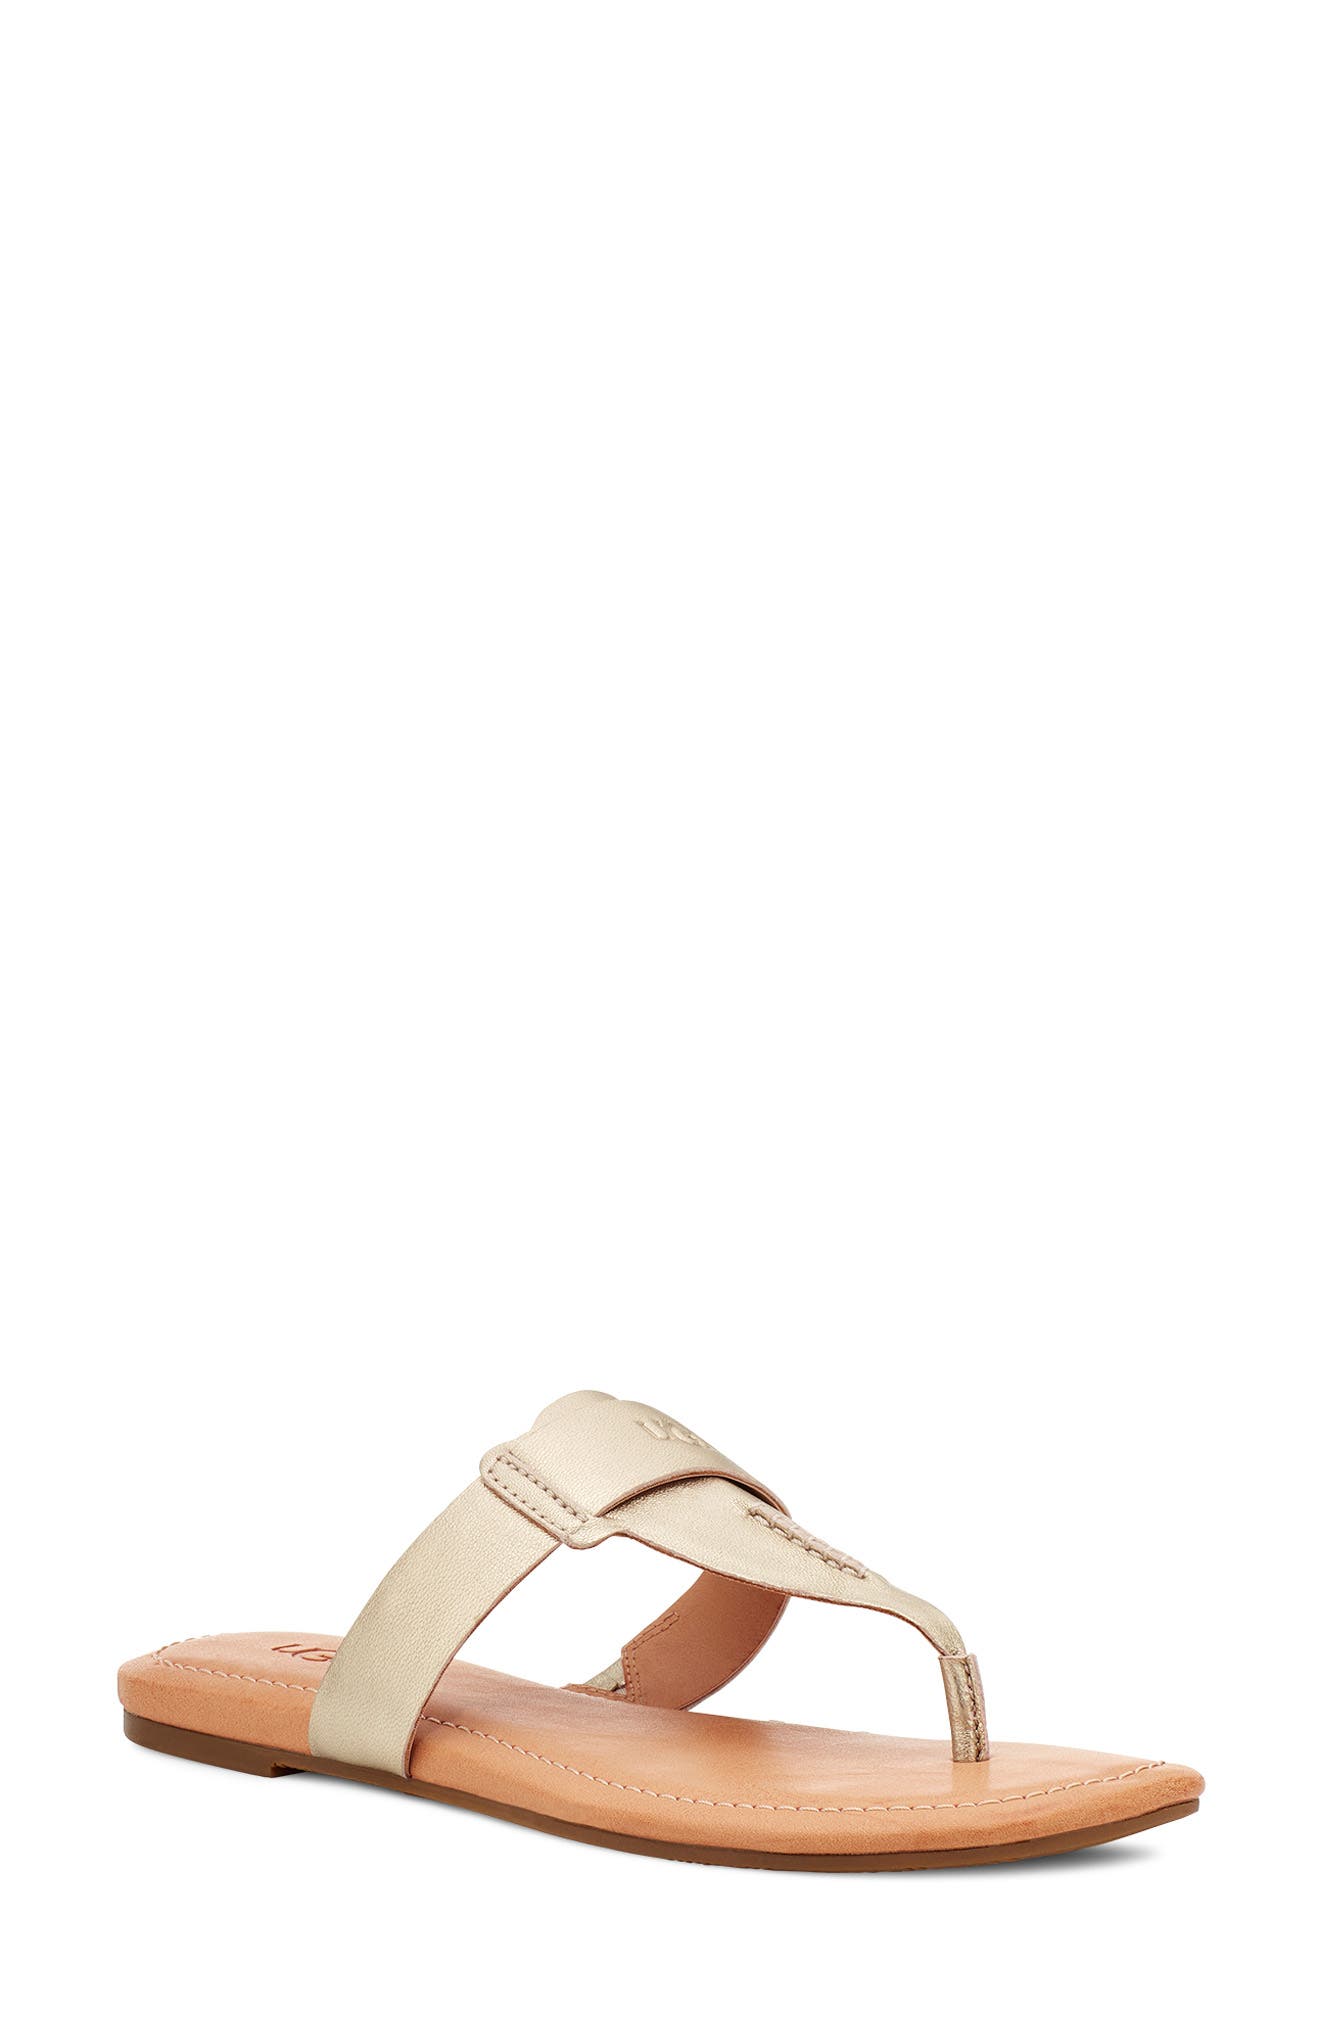 Details about   Trary Thong Sandals with T-Strap Open Toe Ankle Buckle Flat Sandal for Women 